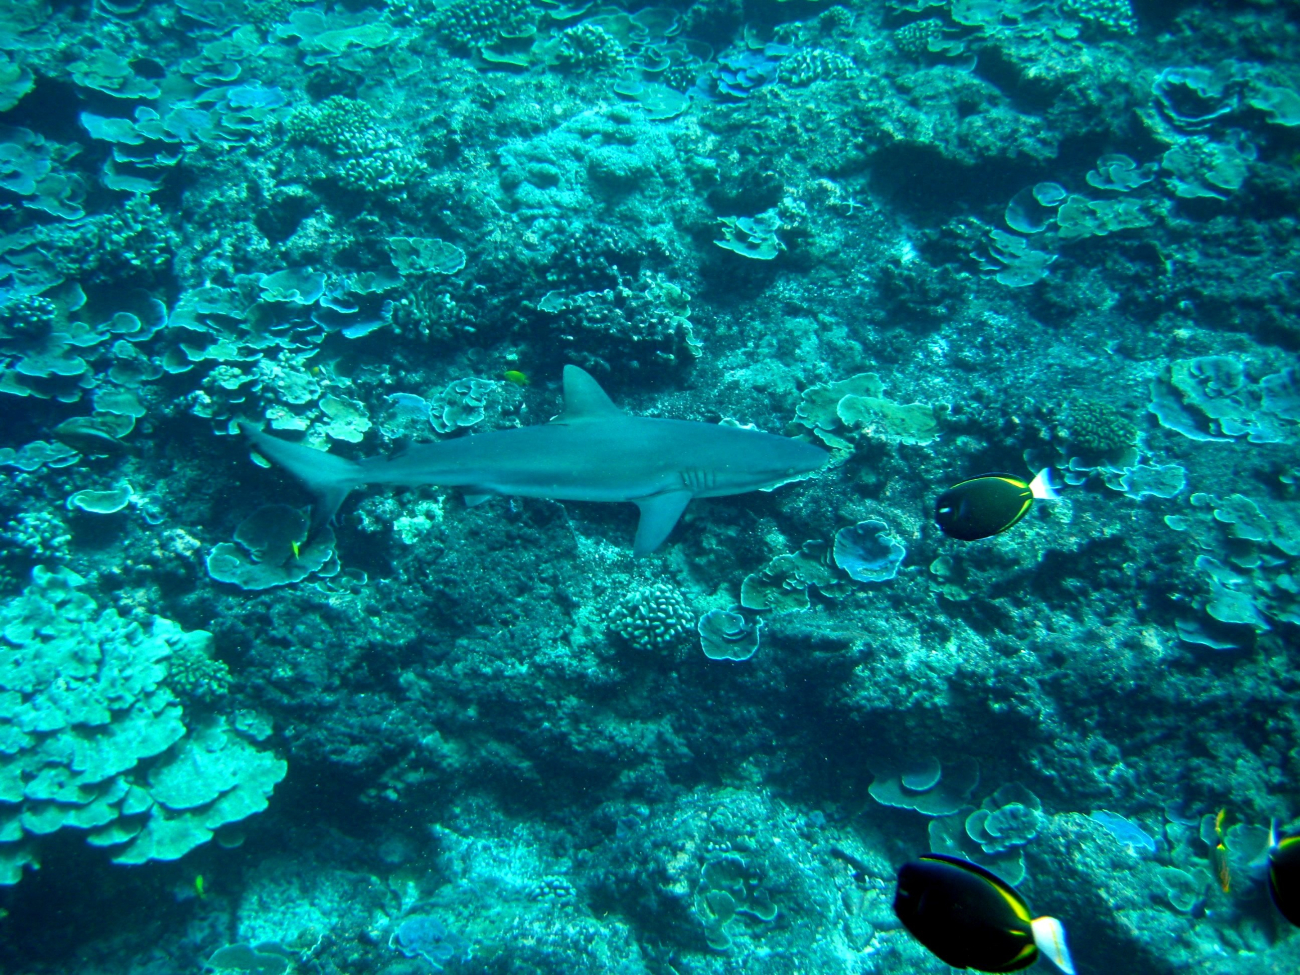 Gray reef shark (Carcharhinus amblyrhynchos) over the reef with whitecheeksurgeonfish (Acanthurus nigricans) hovering above